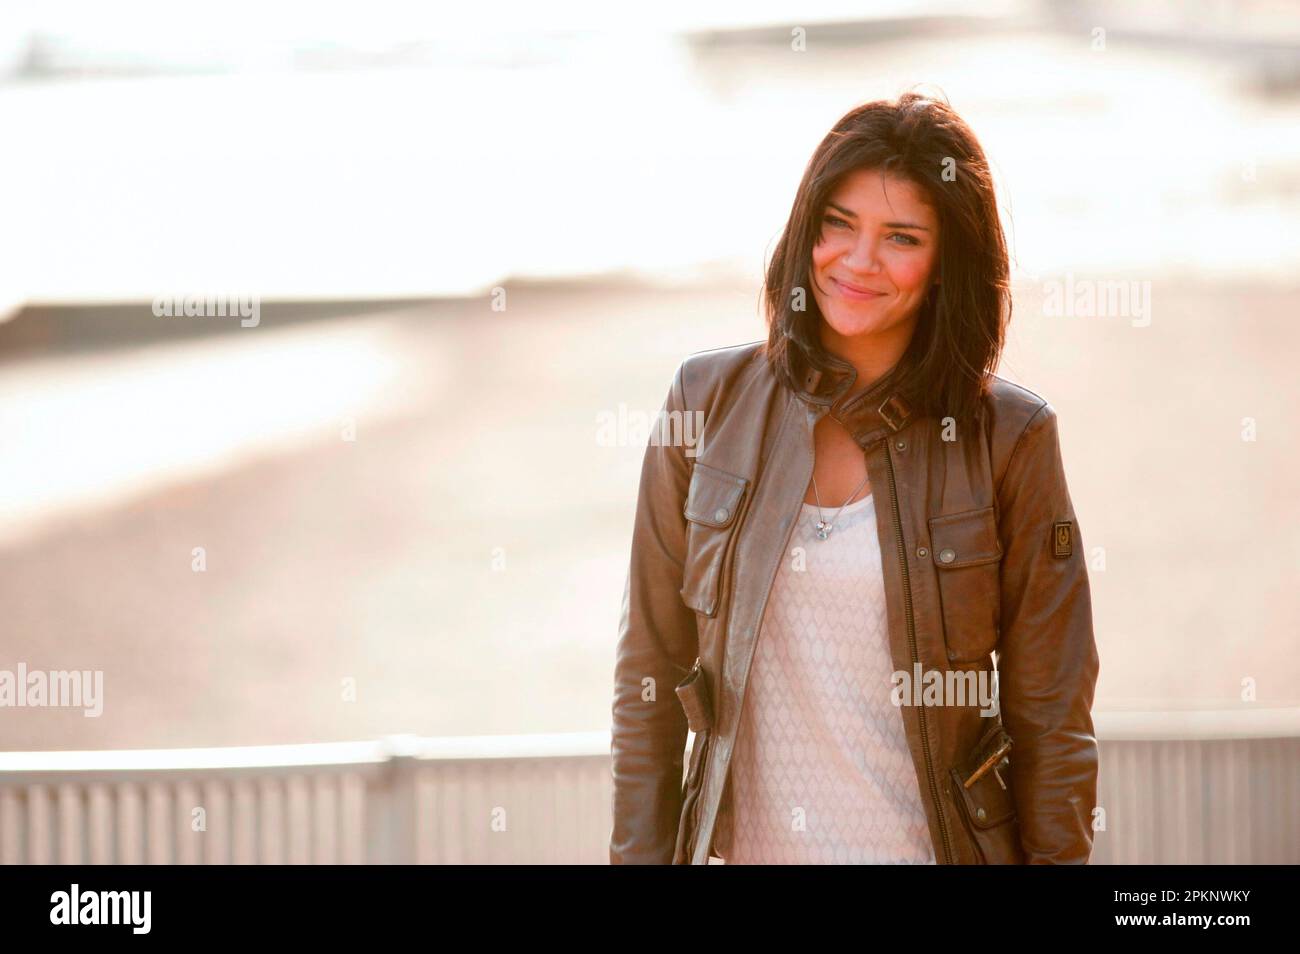 JESSICA SZOHR in LOVE BITE (2012), directed by ANDY DE EMMONY. Credit: WestEnd Films / Album Stock Photo